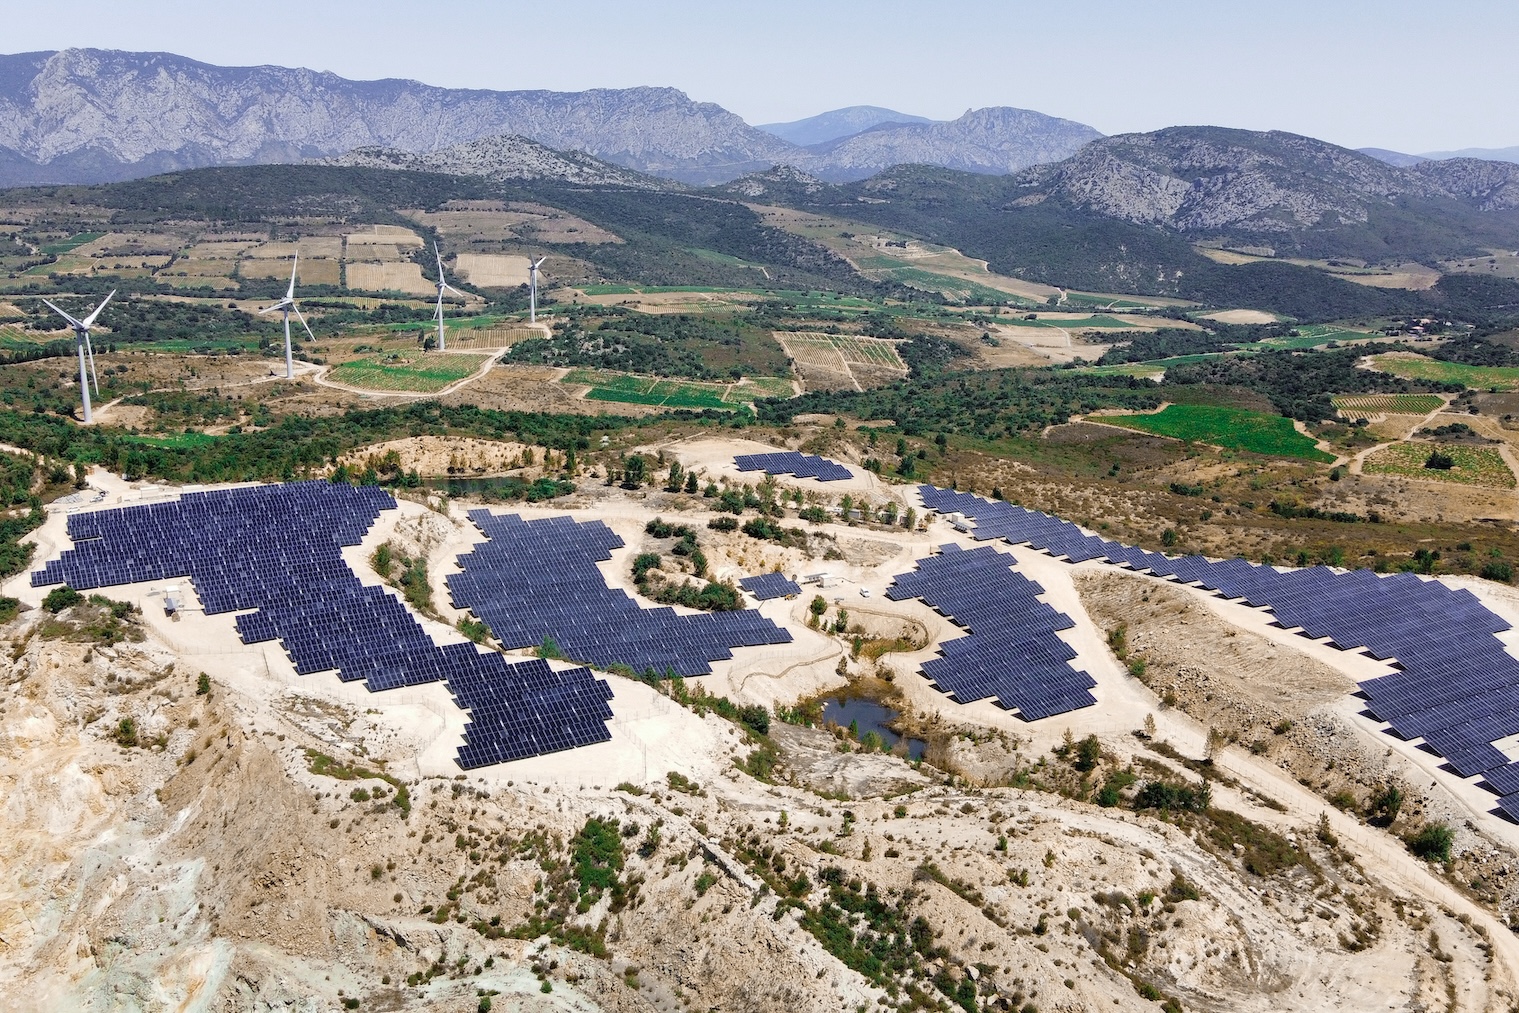 Located in Lansac (France), this former quarry has been converted into a solar power plant with a capacity of 4,20 MWp.